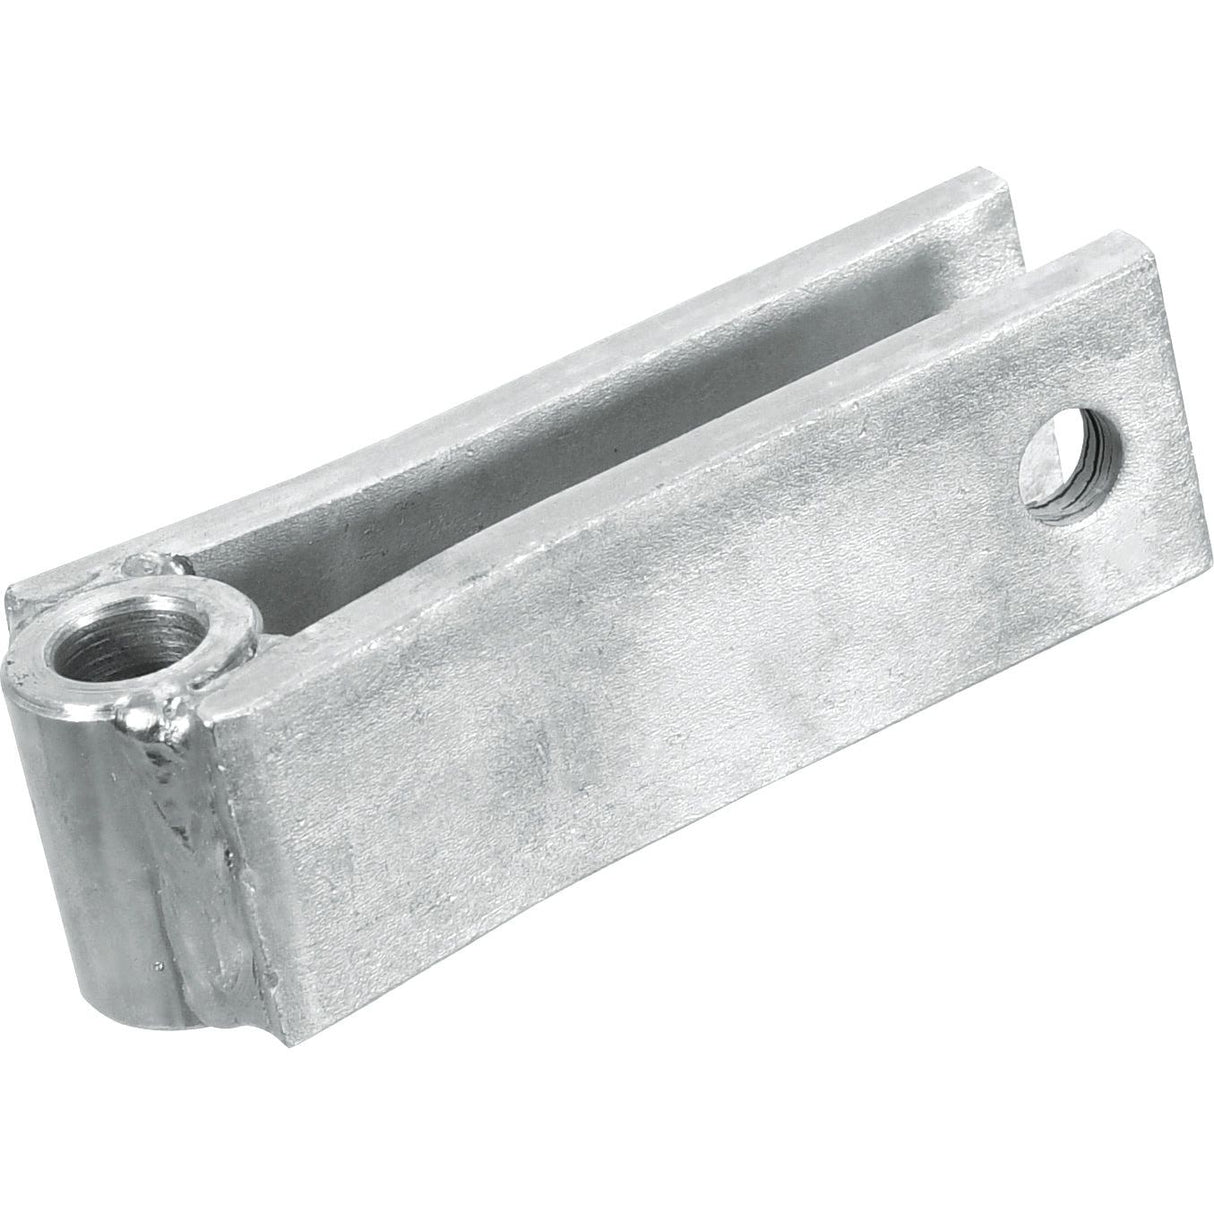 Lift Arm Tapered Clevis Bracket - tapered
 - S.70765 - Farming Parts